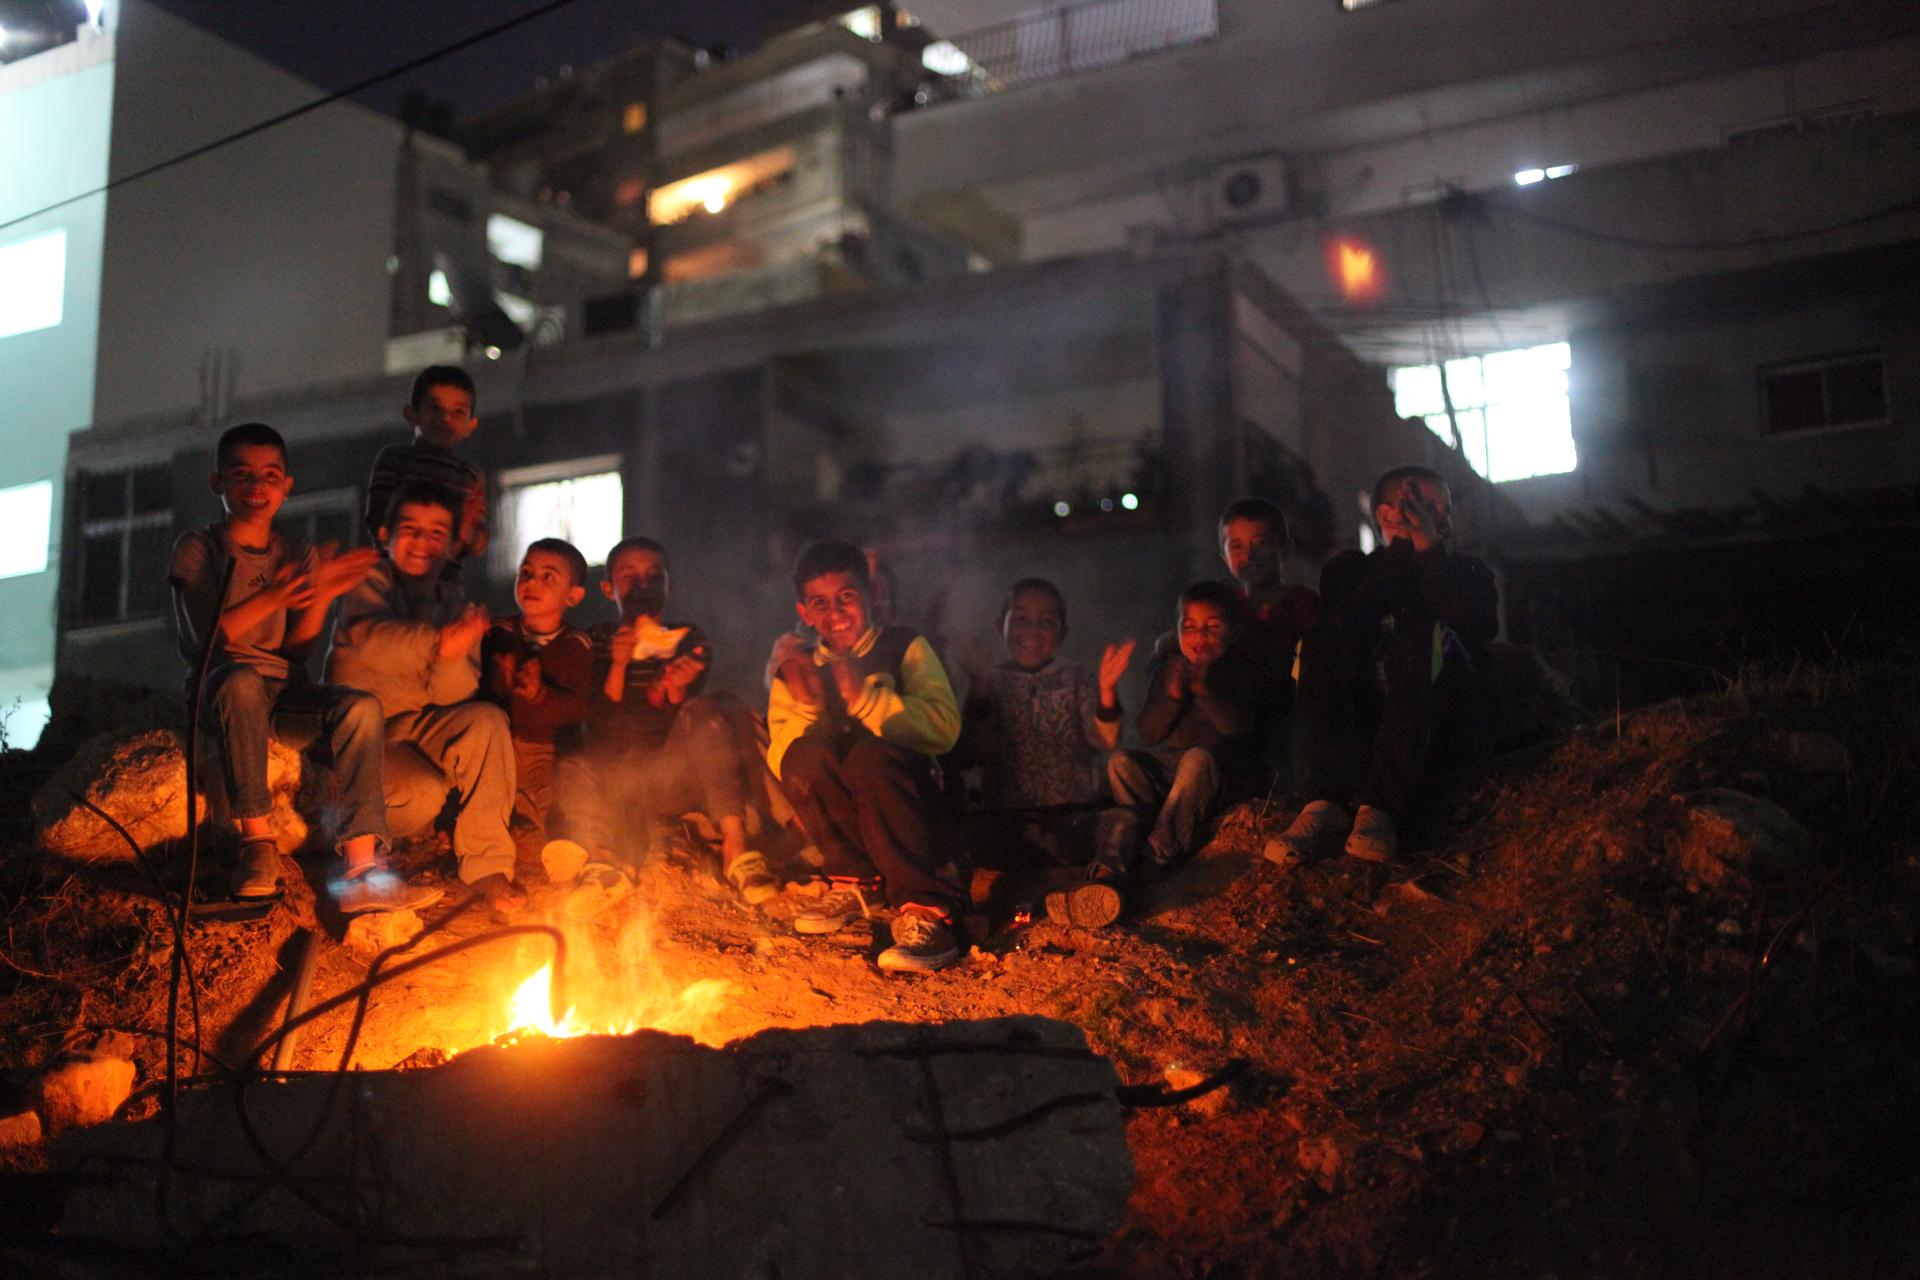 Children play by a bonfire in Shuafat refugee camp in November 2014. Activist Baha Nababta devoted his life to improving the camp, including increasing activities for youth, but he was murdered before he could carry through his plans.